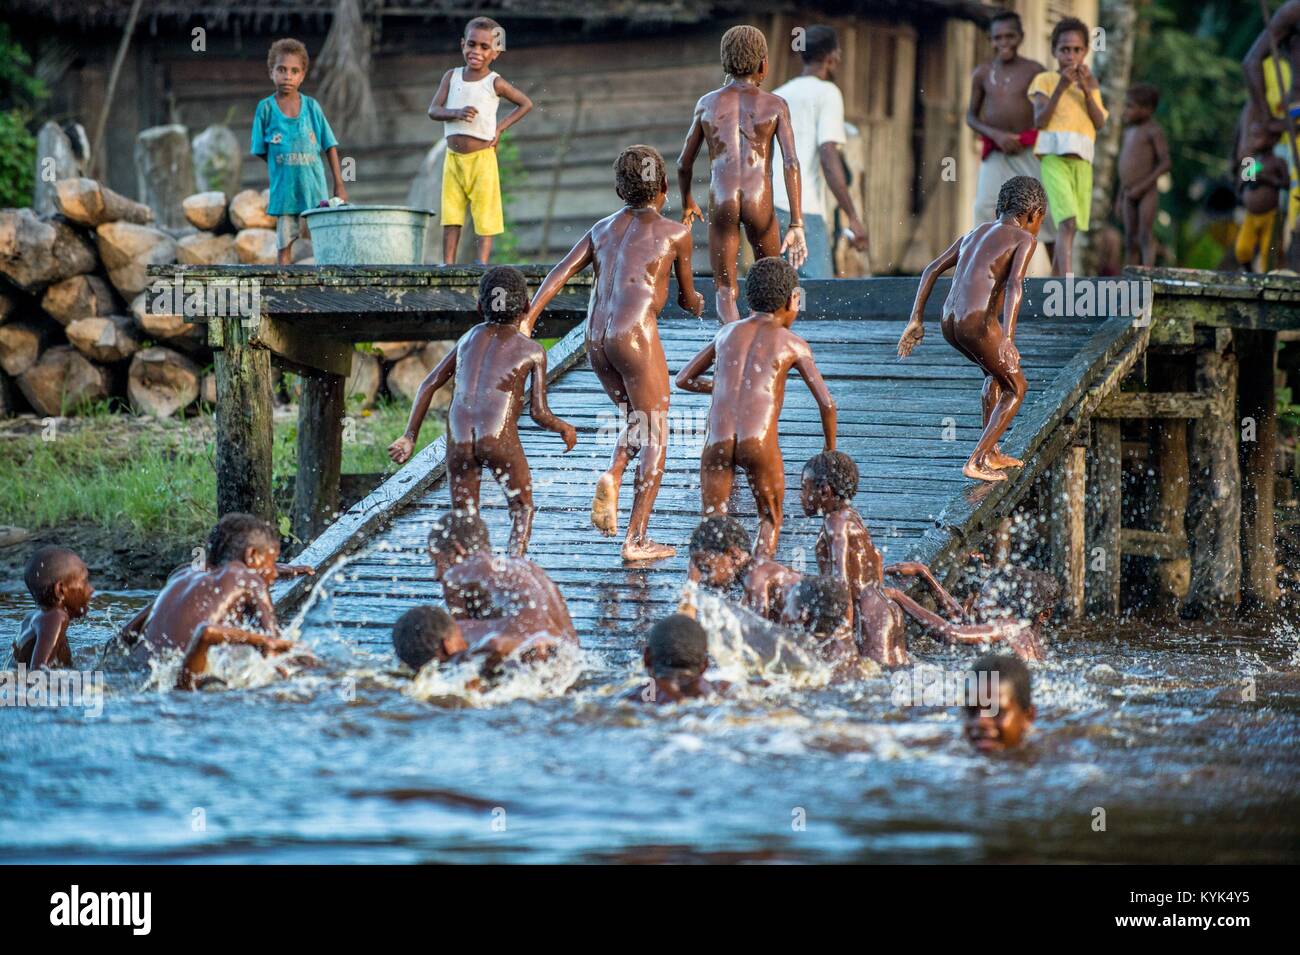 Noisy fun kids. Children of the tribe of Asmat people bathe and swim in